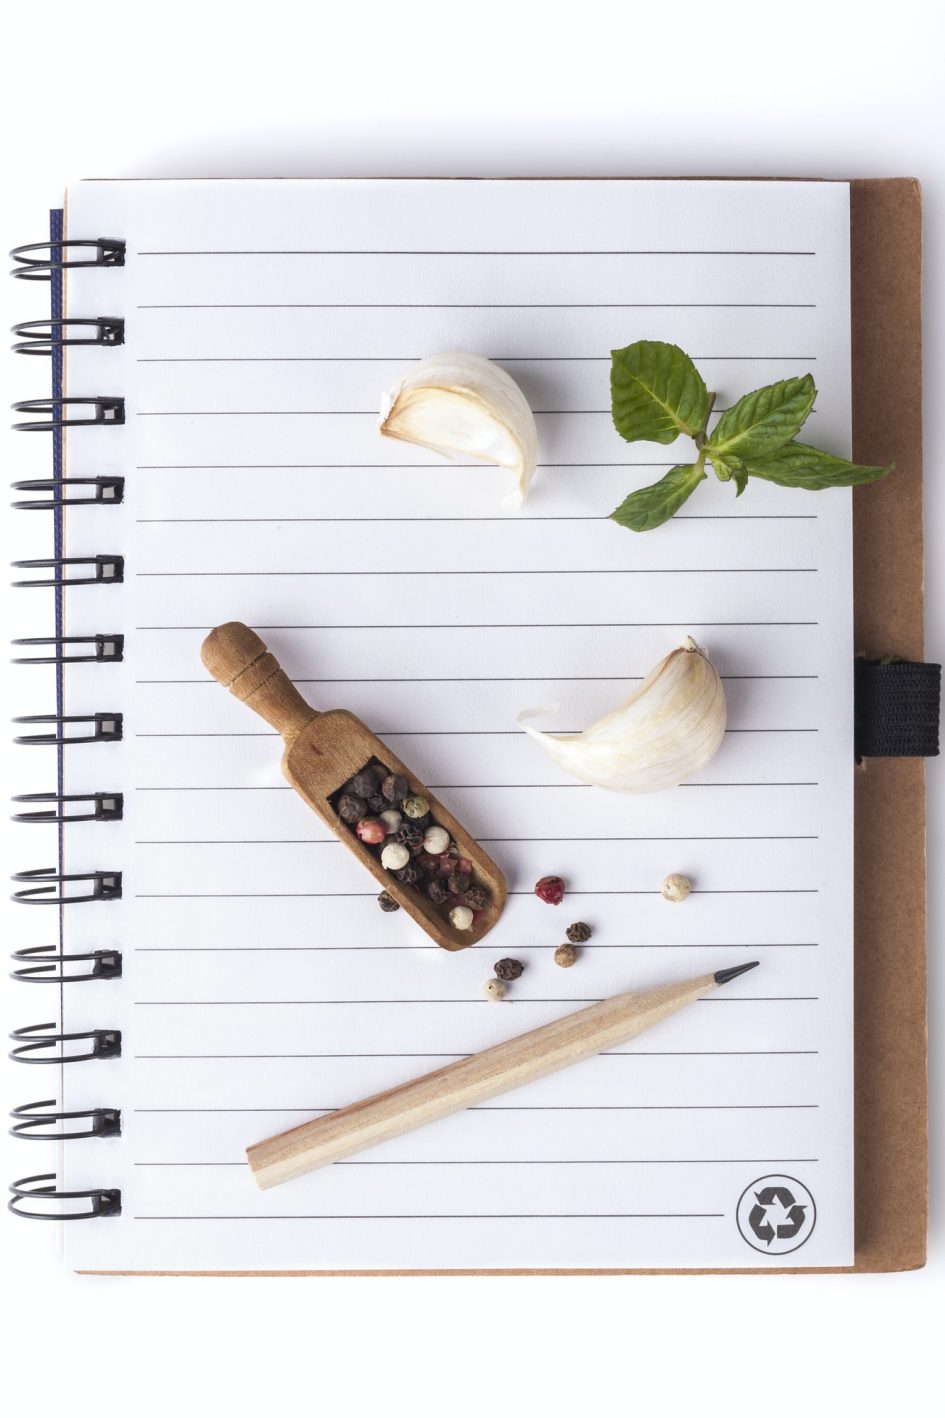 Recipe Notebook and Ingredients